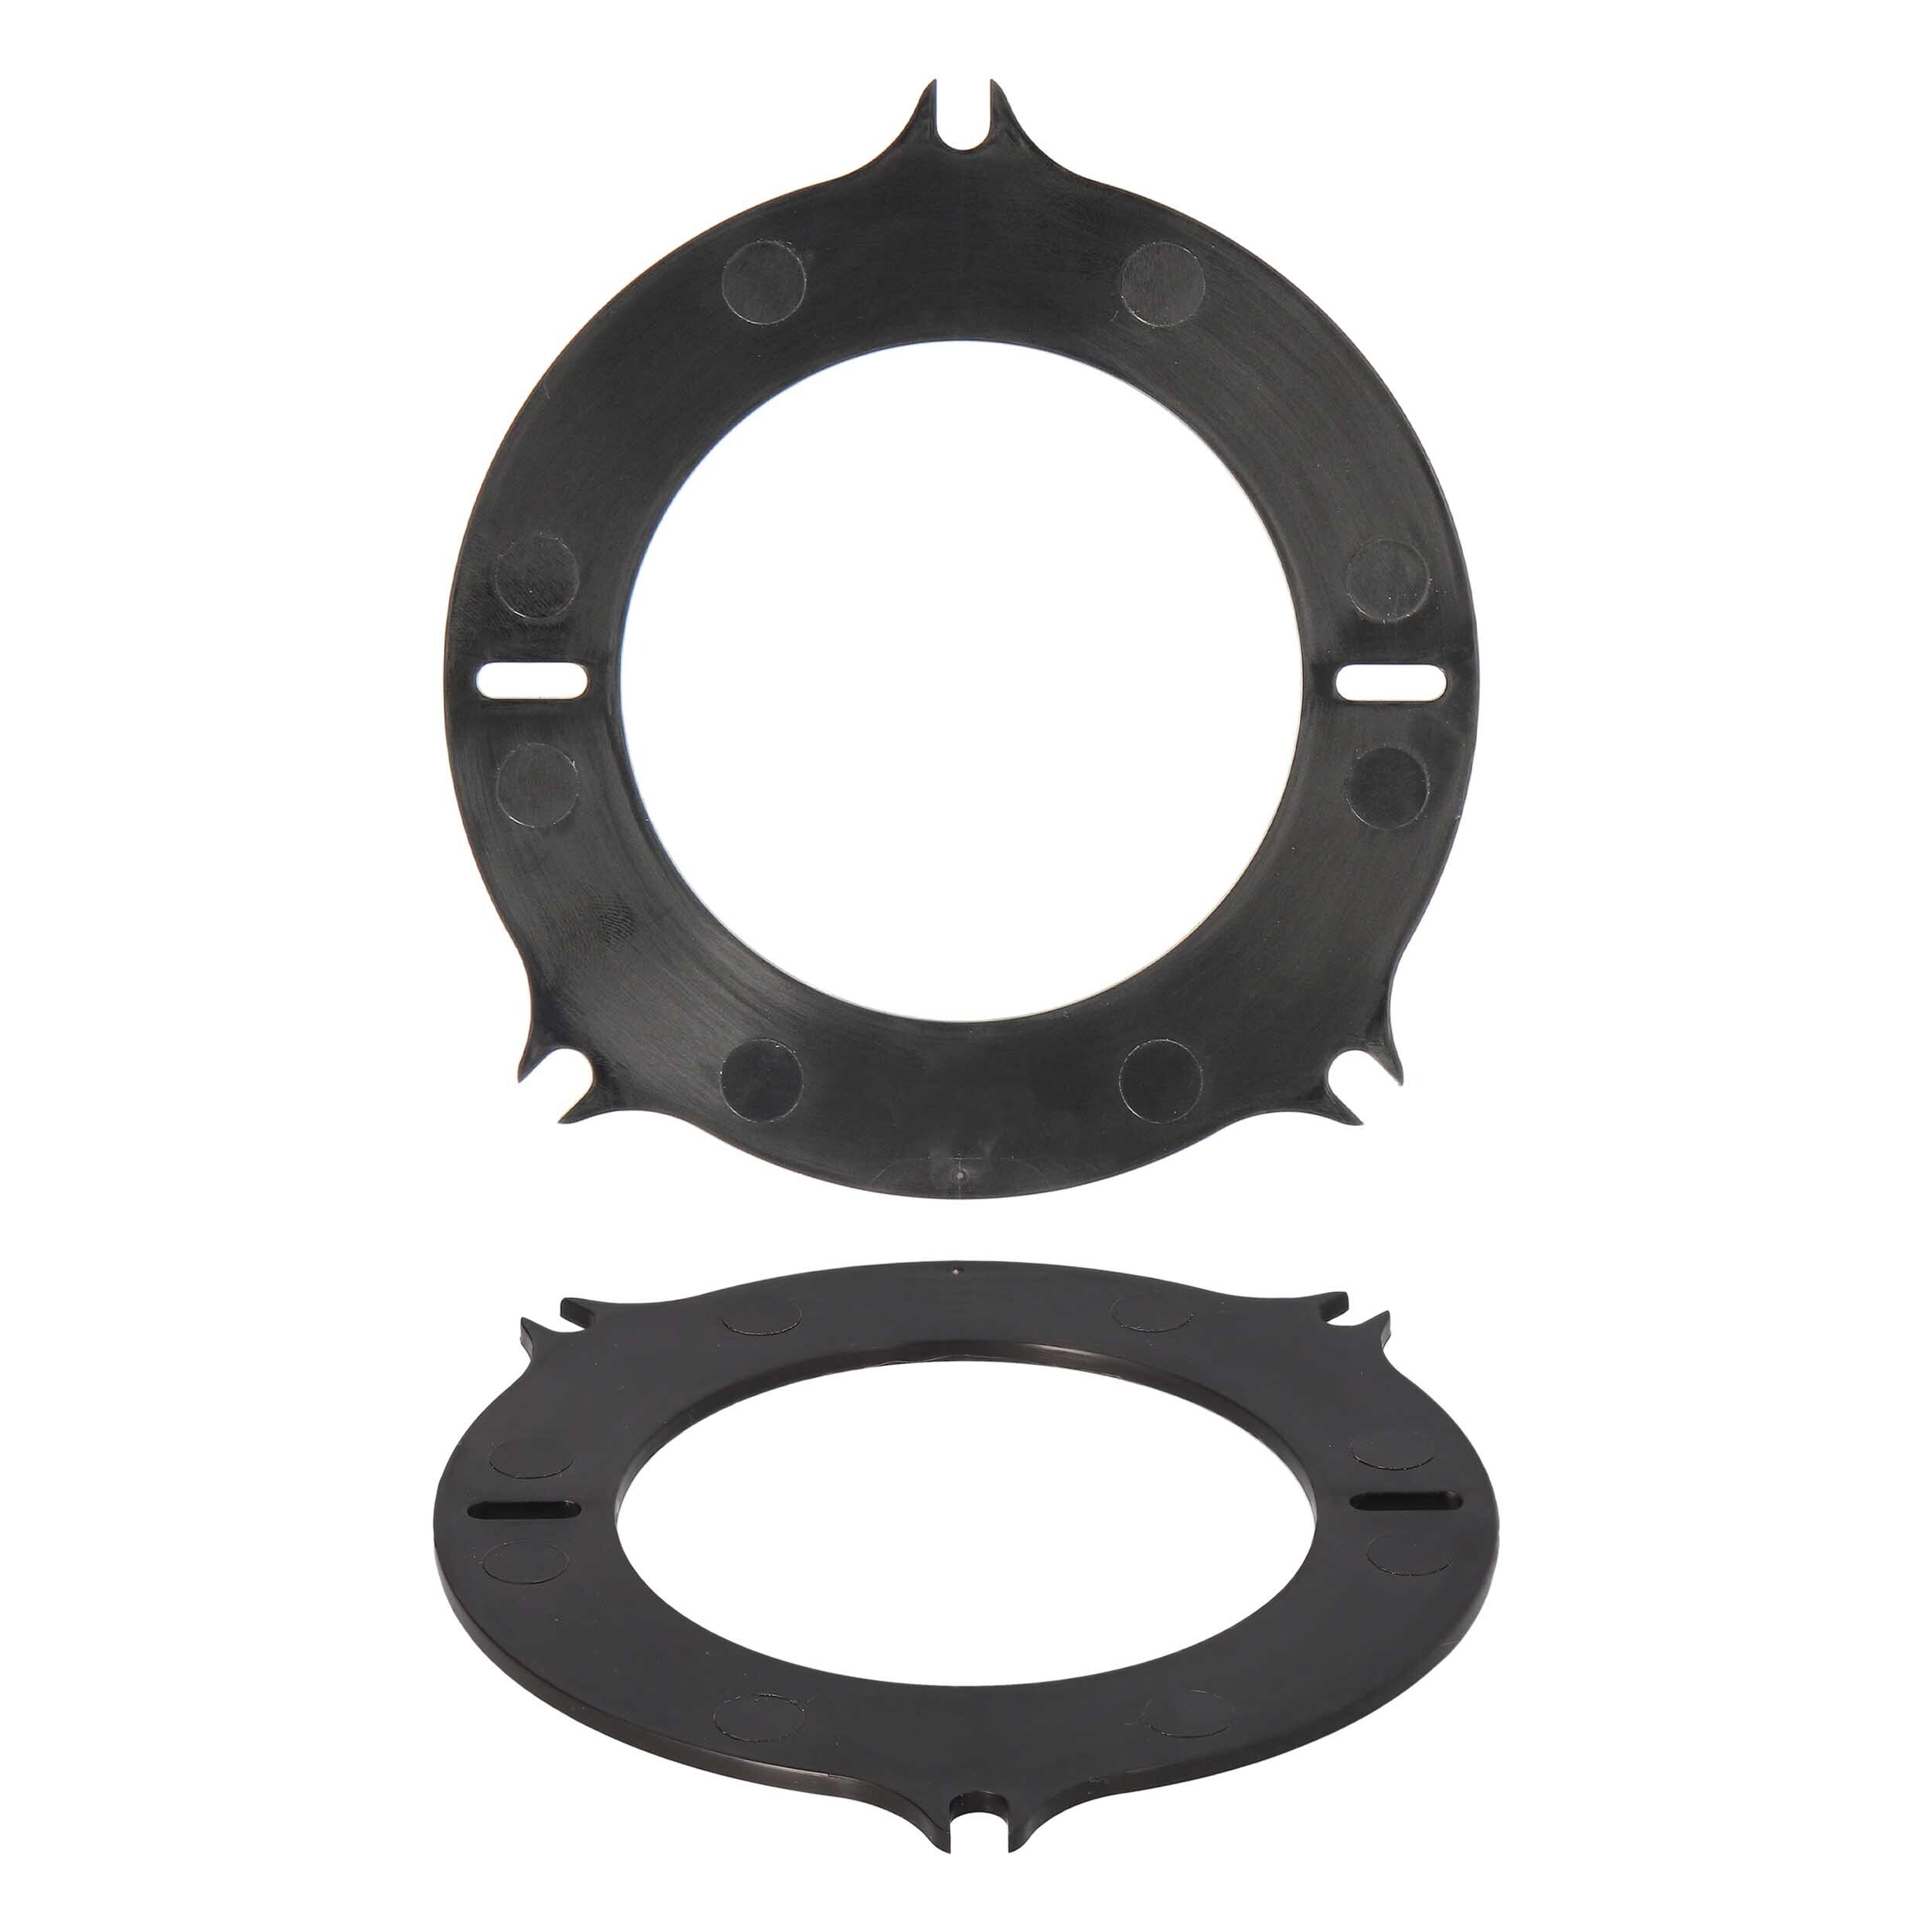 BMW and Mini 2006-Up 3.5" Speaker Adapter - Pair